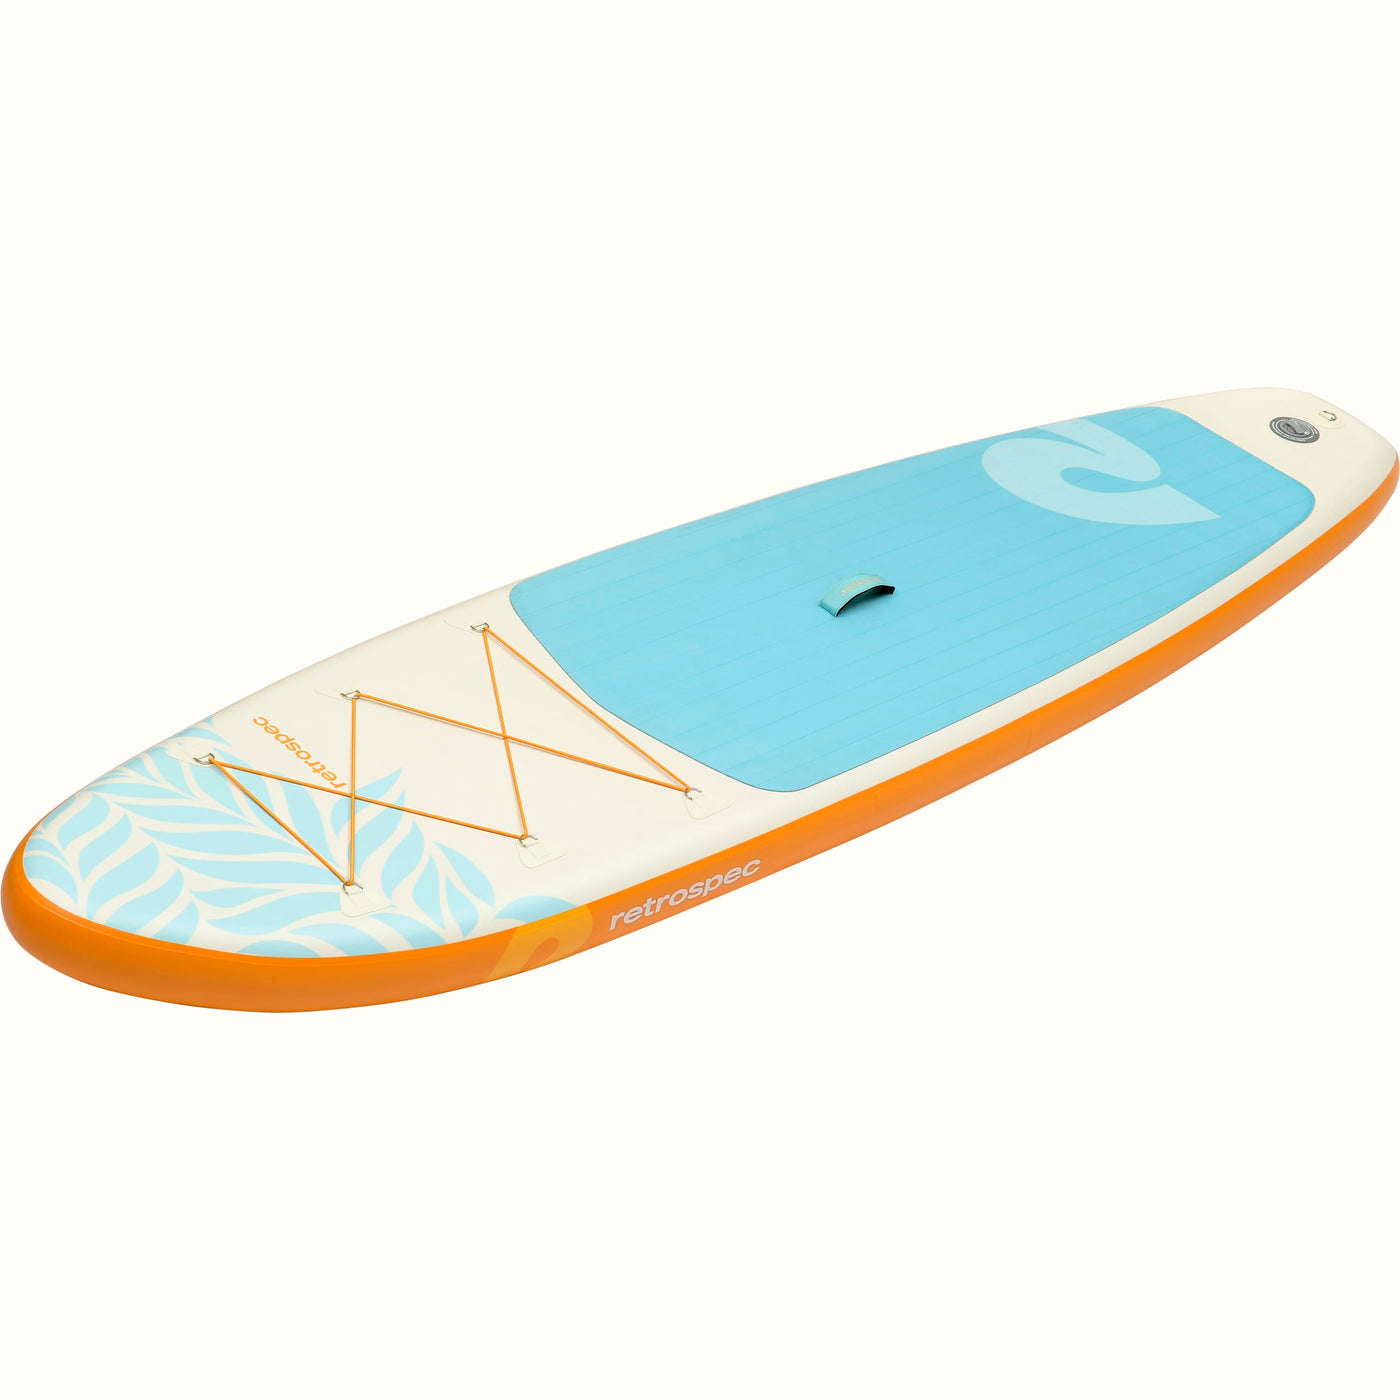 Weekender Inflatable Stand Up Paddle Board 10’6” | Creamsicle